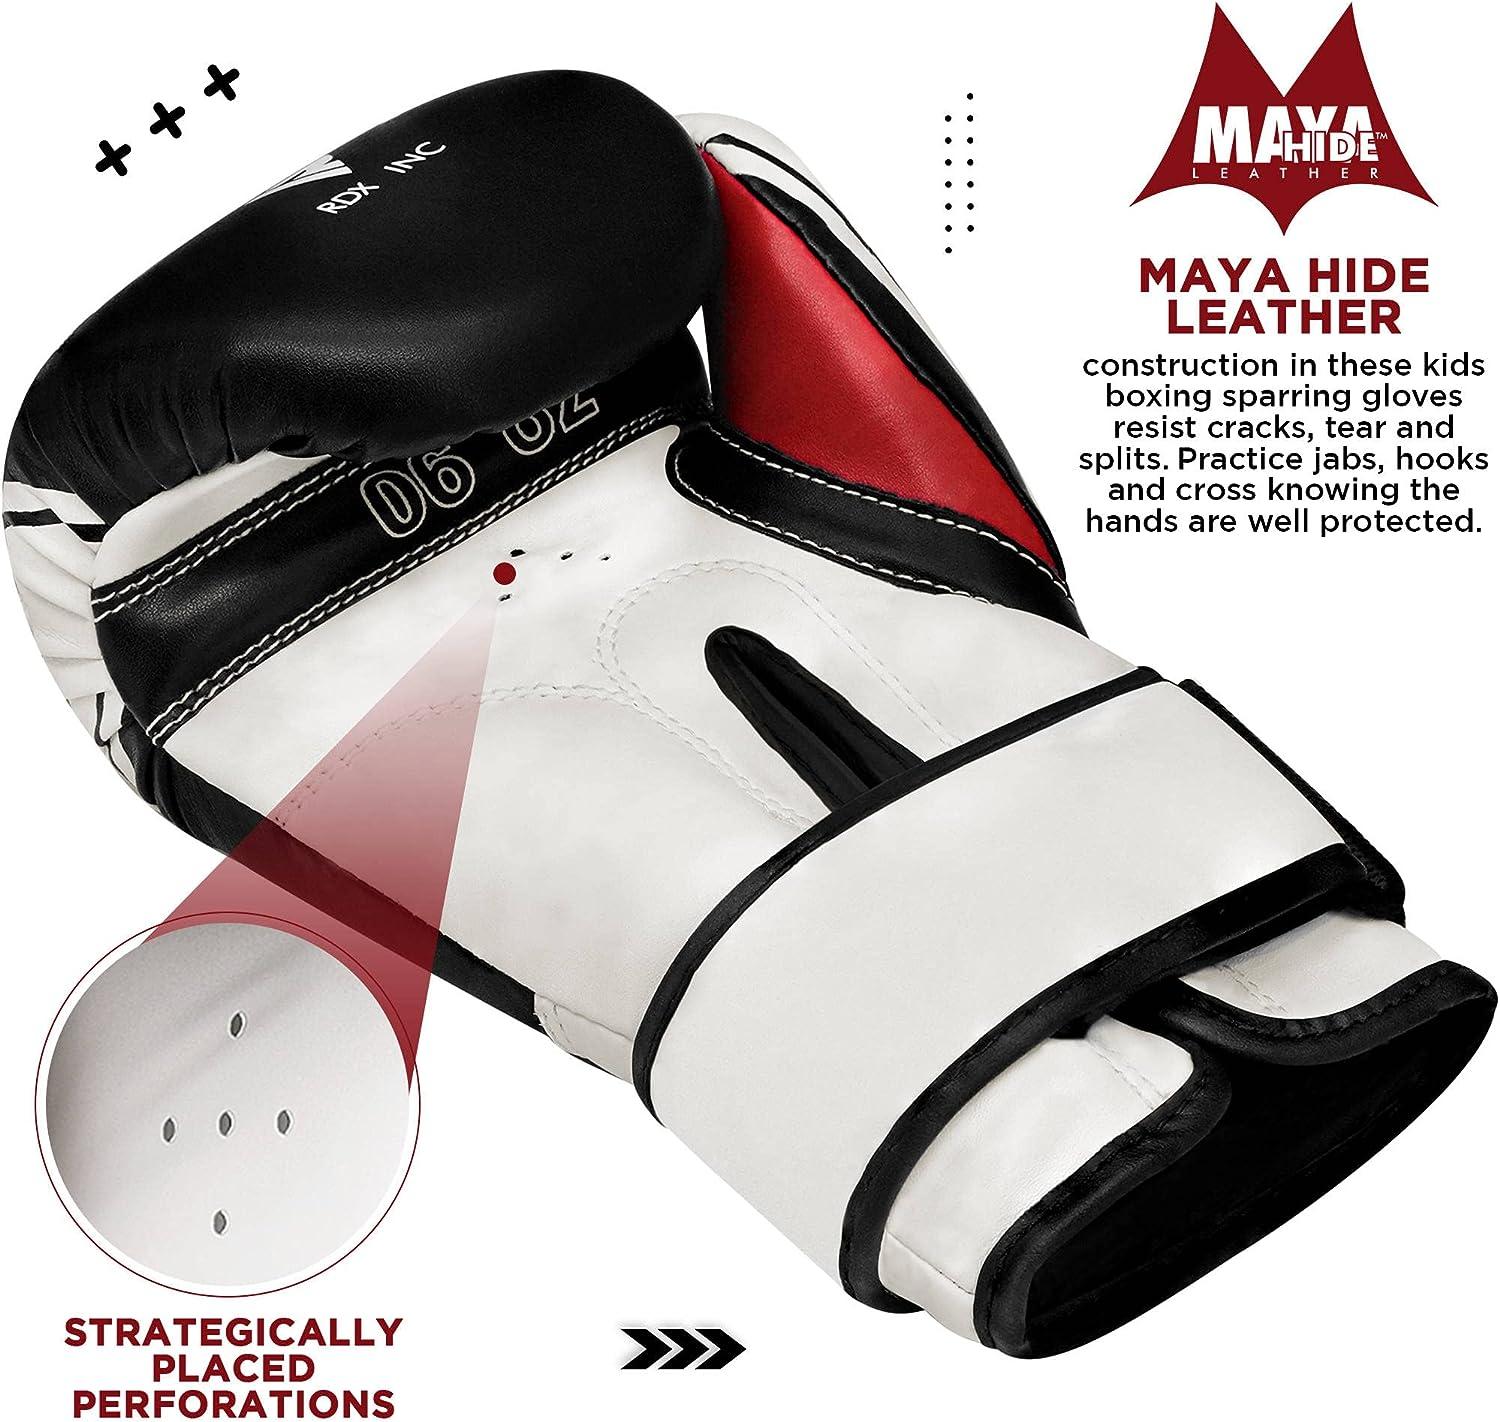 RDX Kids Boxing Pads Focus Mitts, Maya Hide Leather Curved Junior Hook and Jab Target Hand Pads, Coaching Strike Shield for Youth MMA, Boxercise